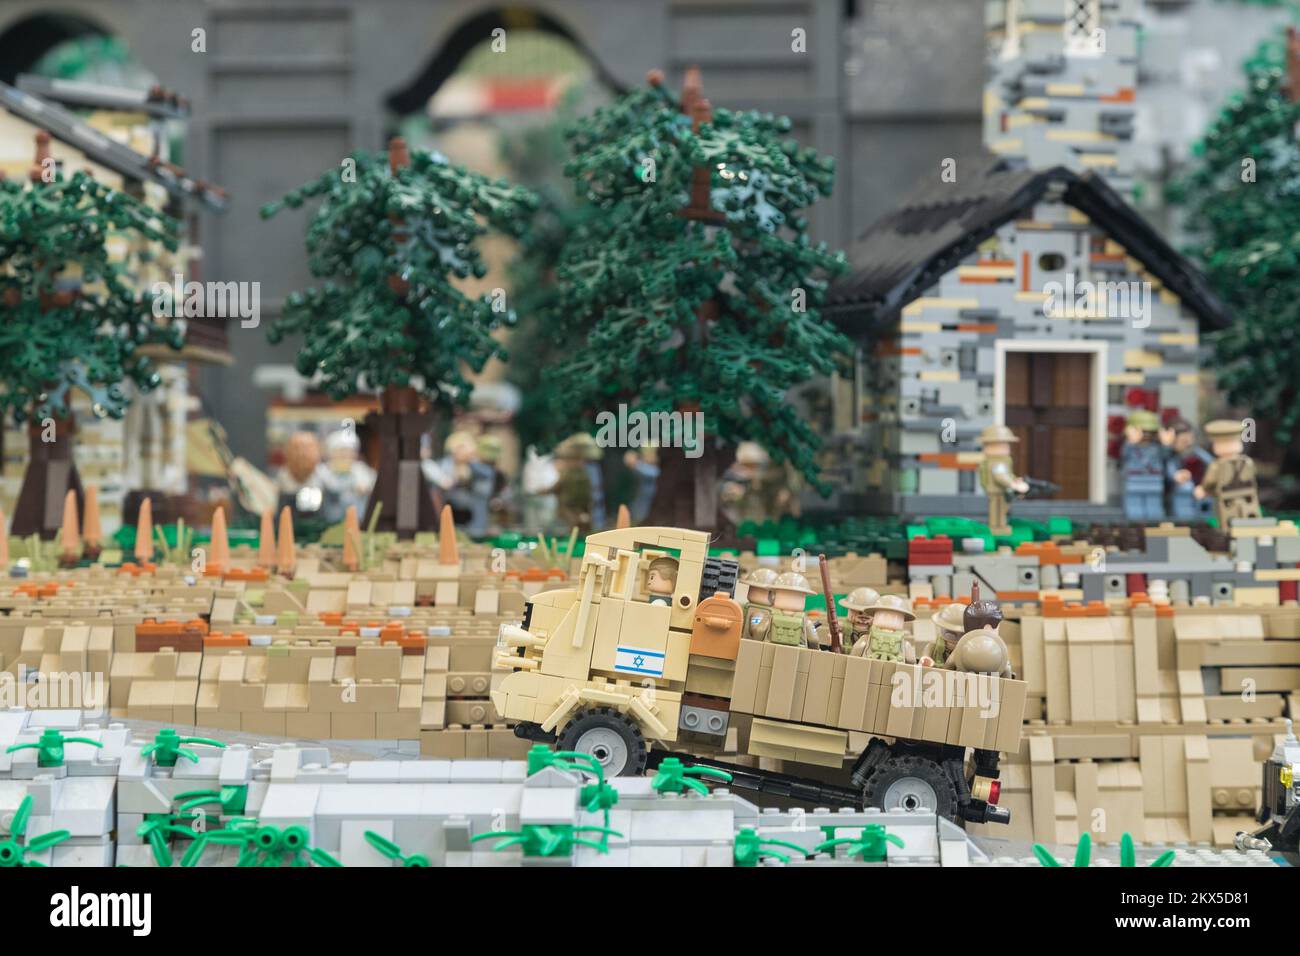 24.03.2018., Croatia, Sveti Ivan Zelina - The first International Lego  convention in Croatia, which was attended by more than 70 LEGO enthusiasts  from a dozen countries. Photo: Davor Puklavec/PIXSELL Stock Photo - Alamy